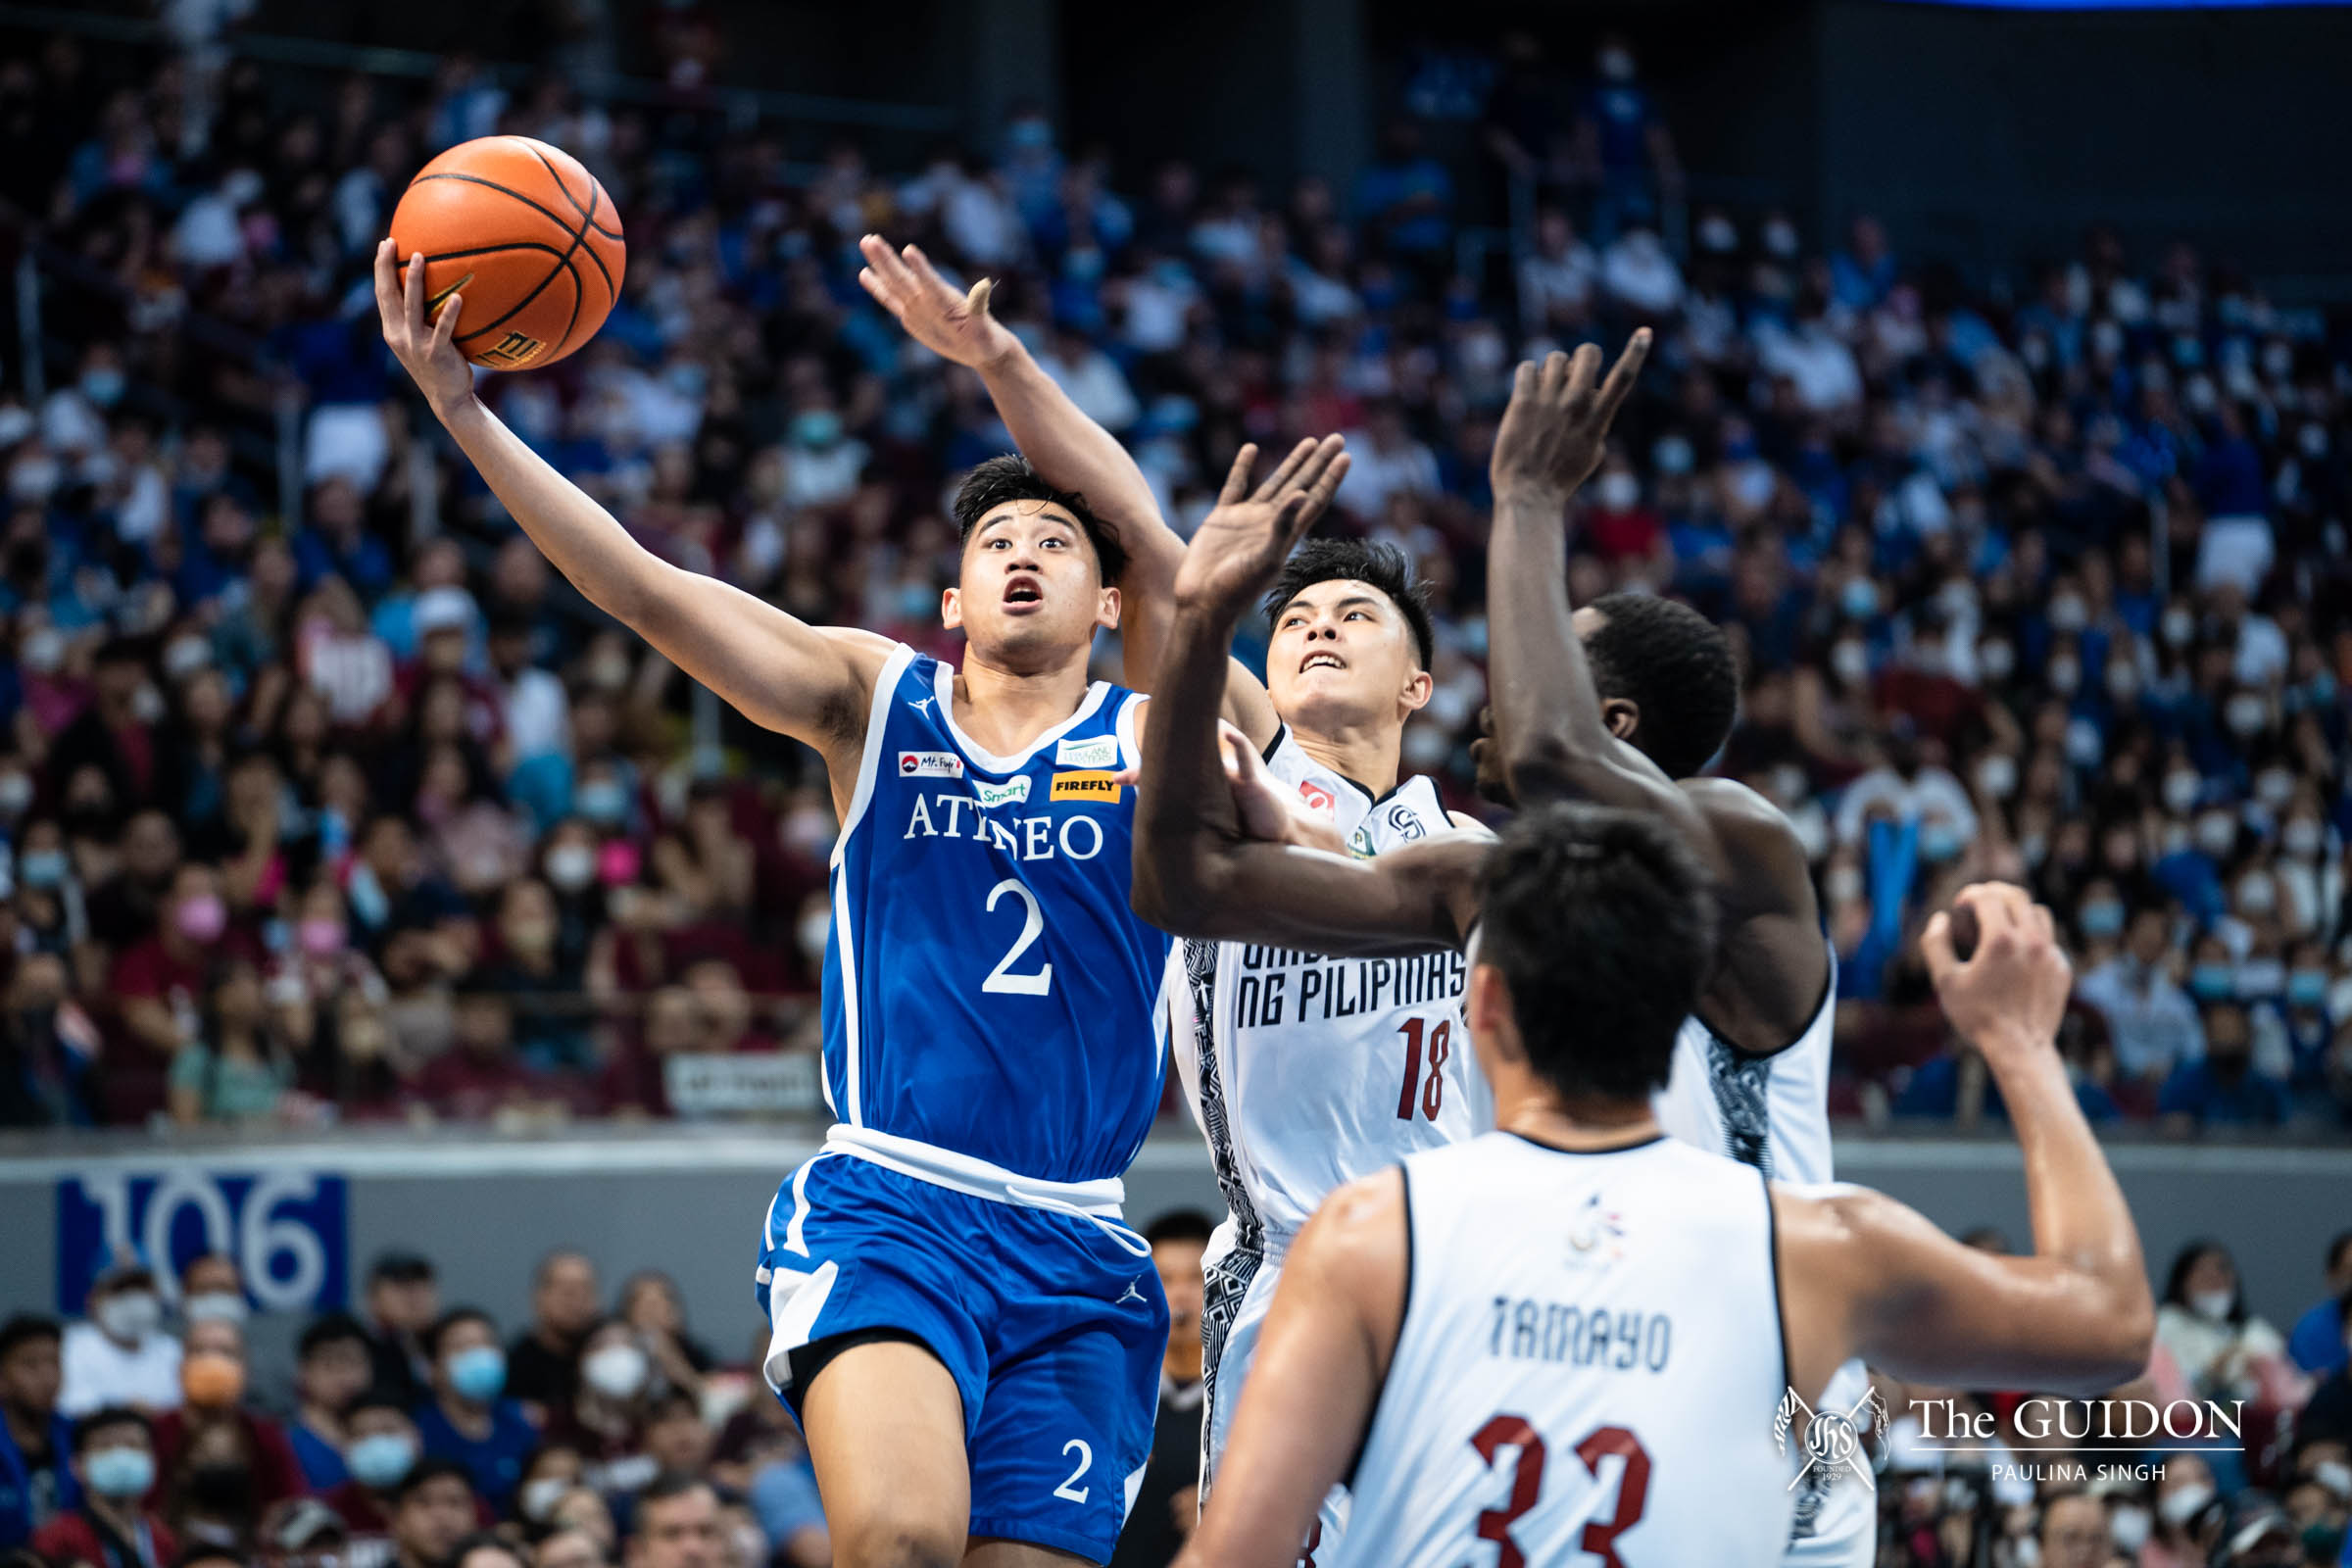 Ateneo falters to UP in Game 1 of UAAP Finals